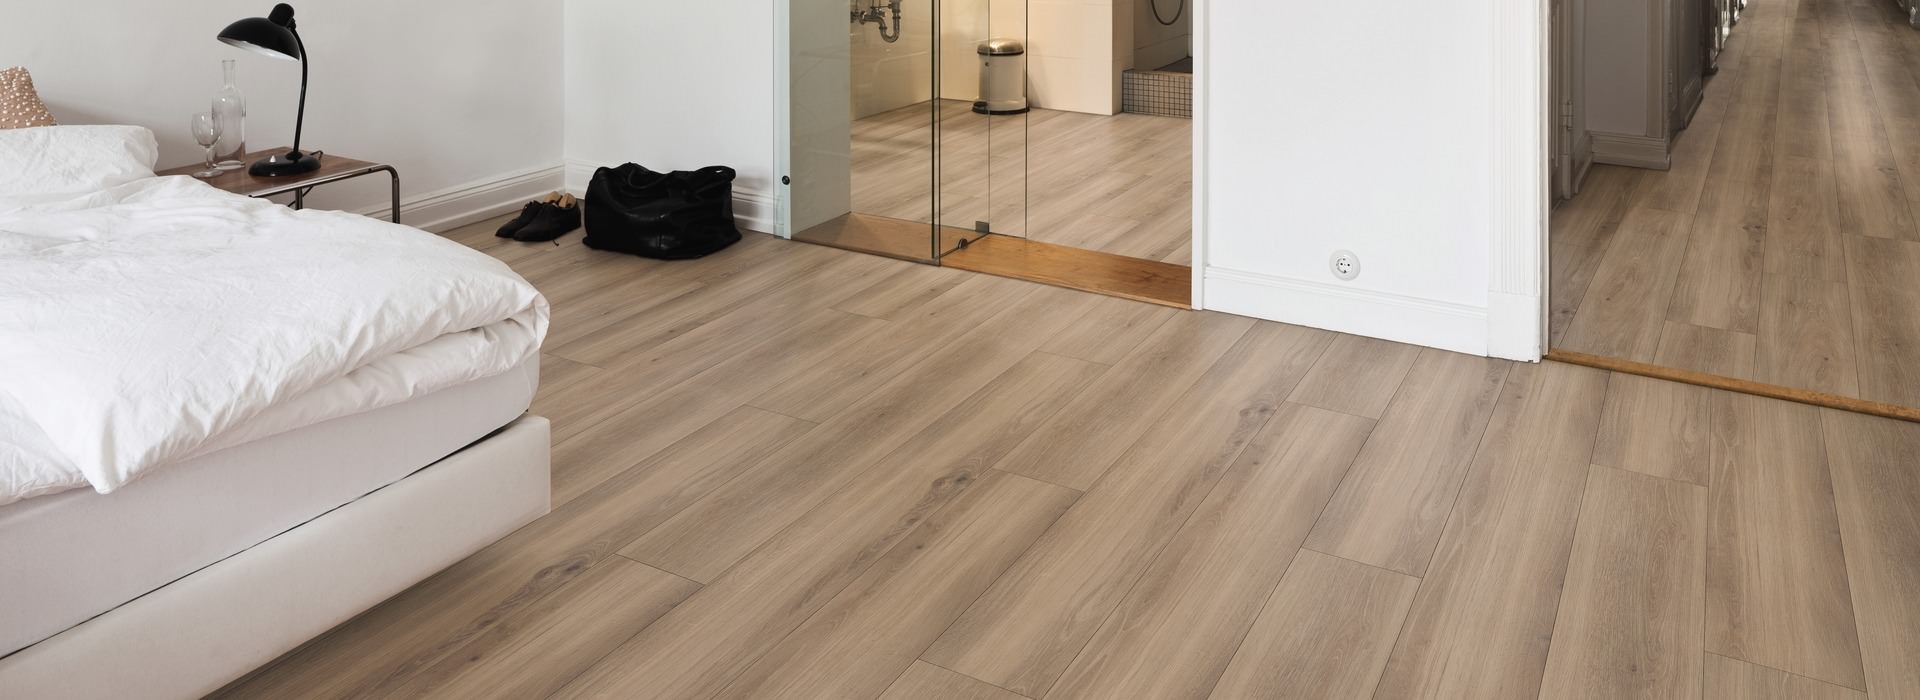 DISANO by HARO ClassicAqua Plank 1-Strip XL 4V Tobacco Oak* brushed Top Connect